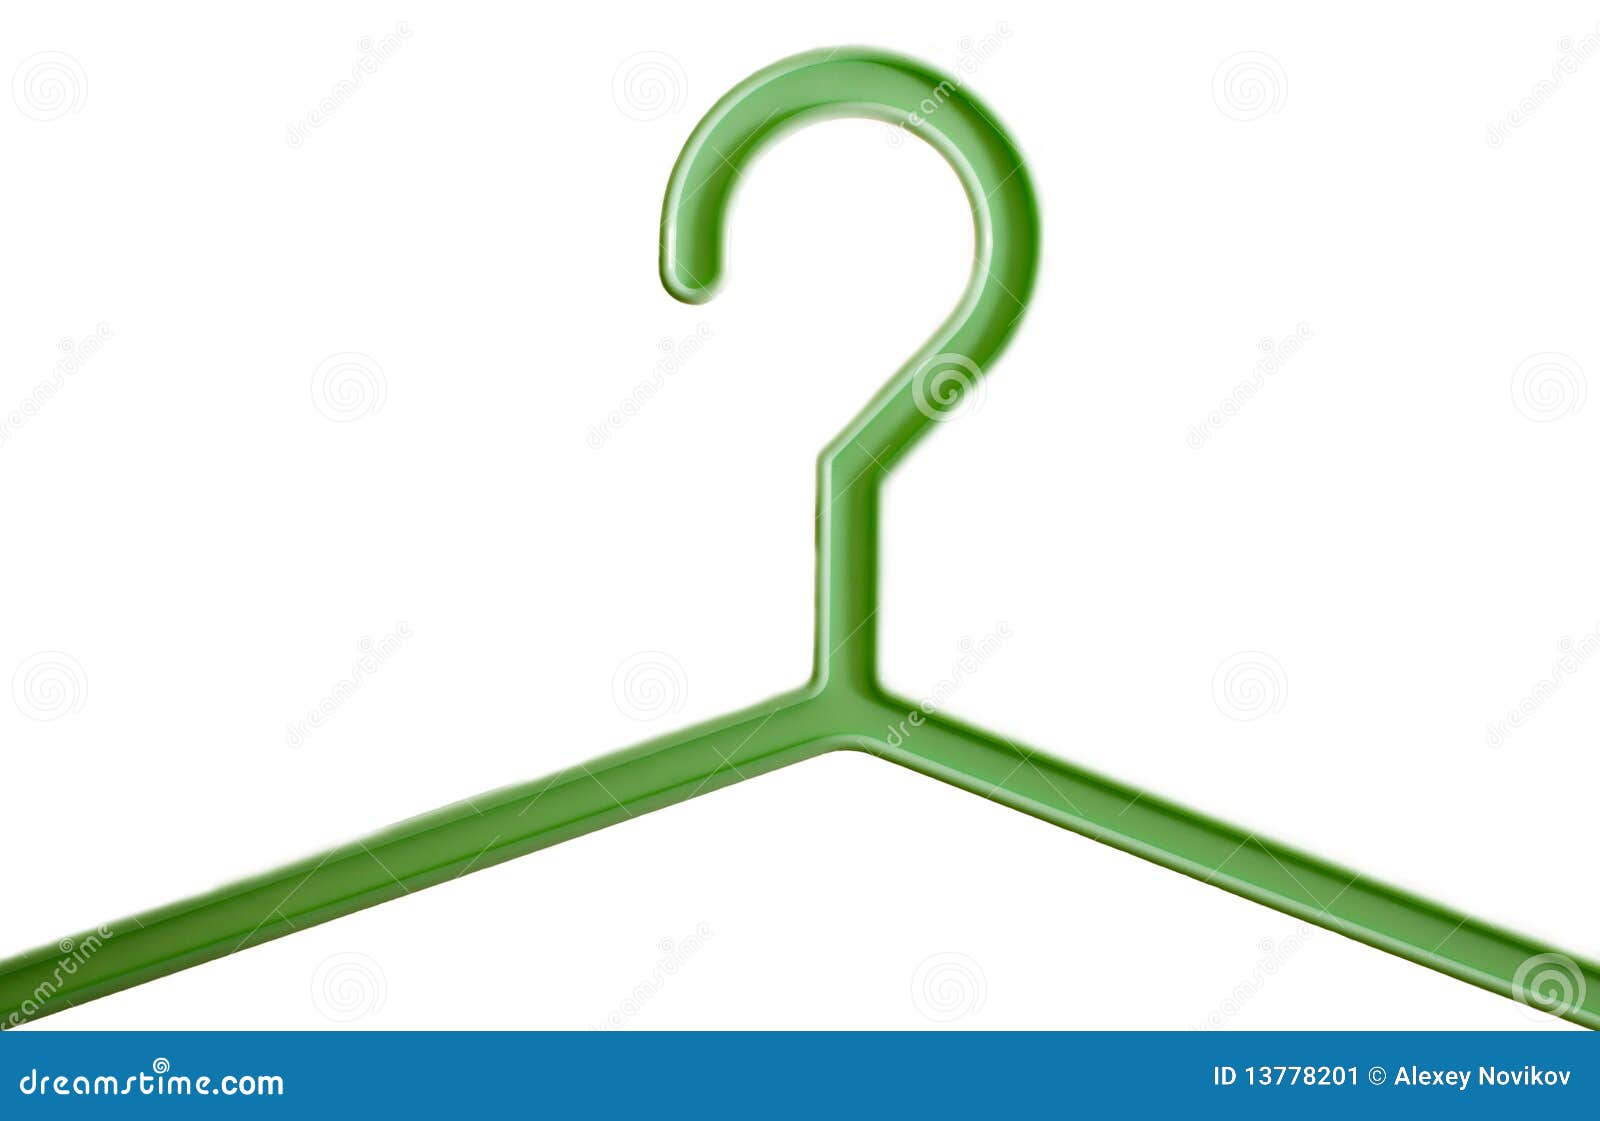 617 Formal Clothes Hangers Stock Photos - Free & Royalty-Free Stock Photos  from Dreamstime